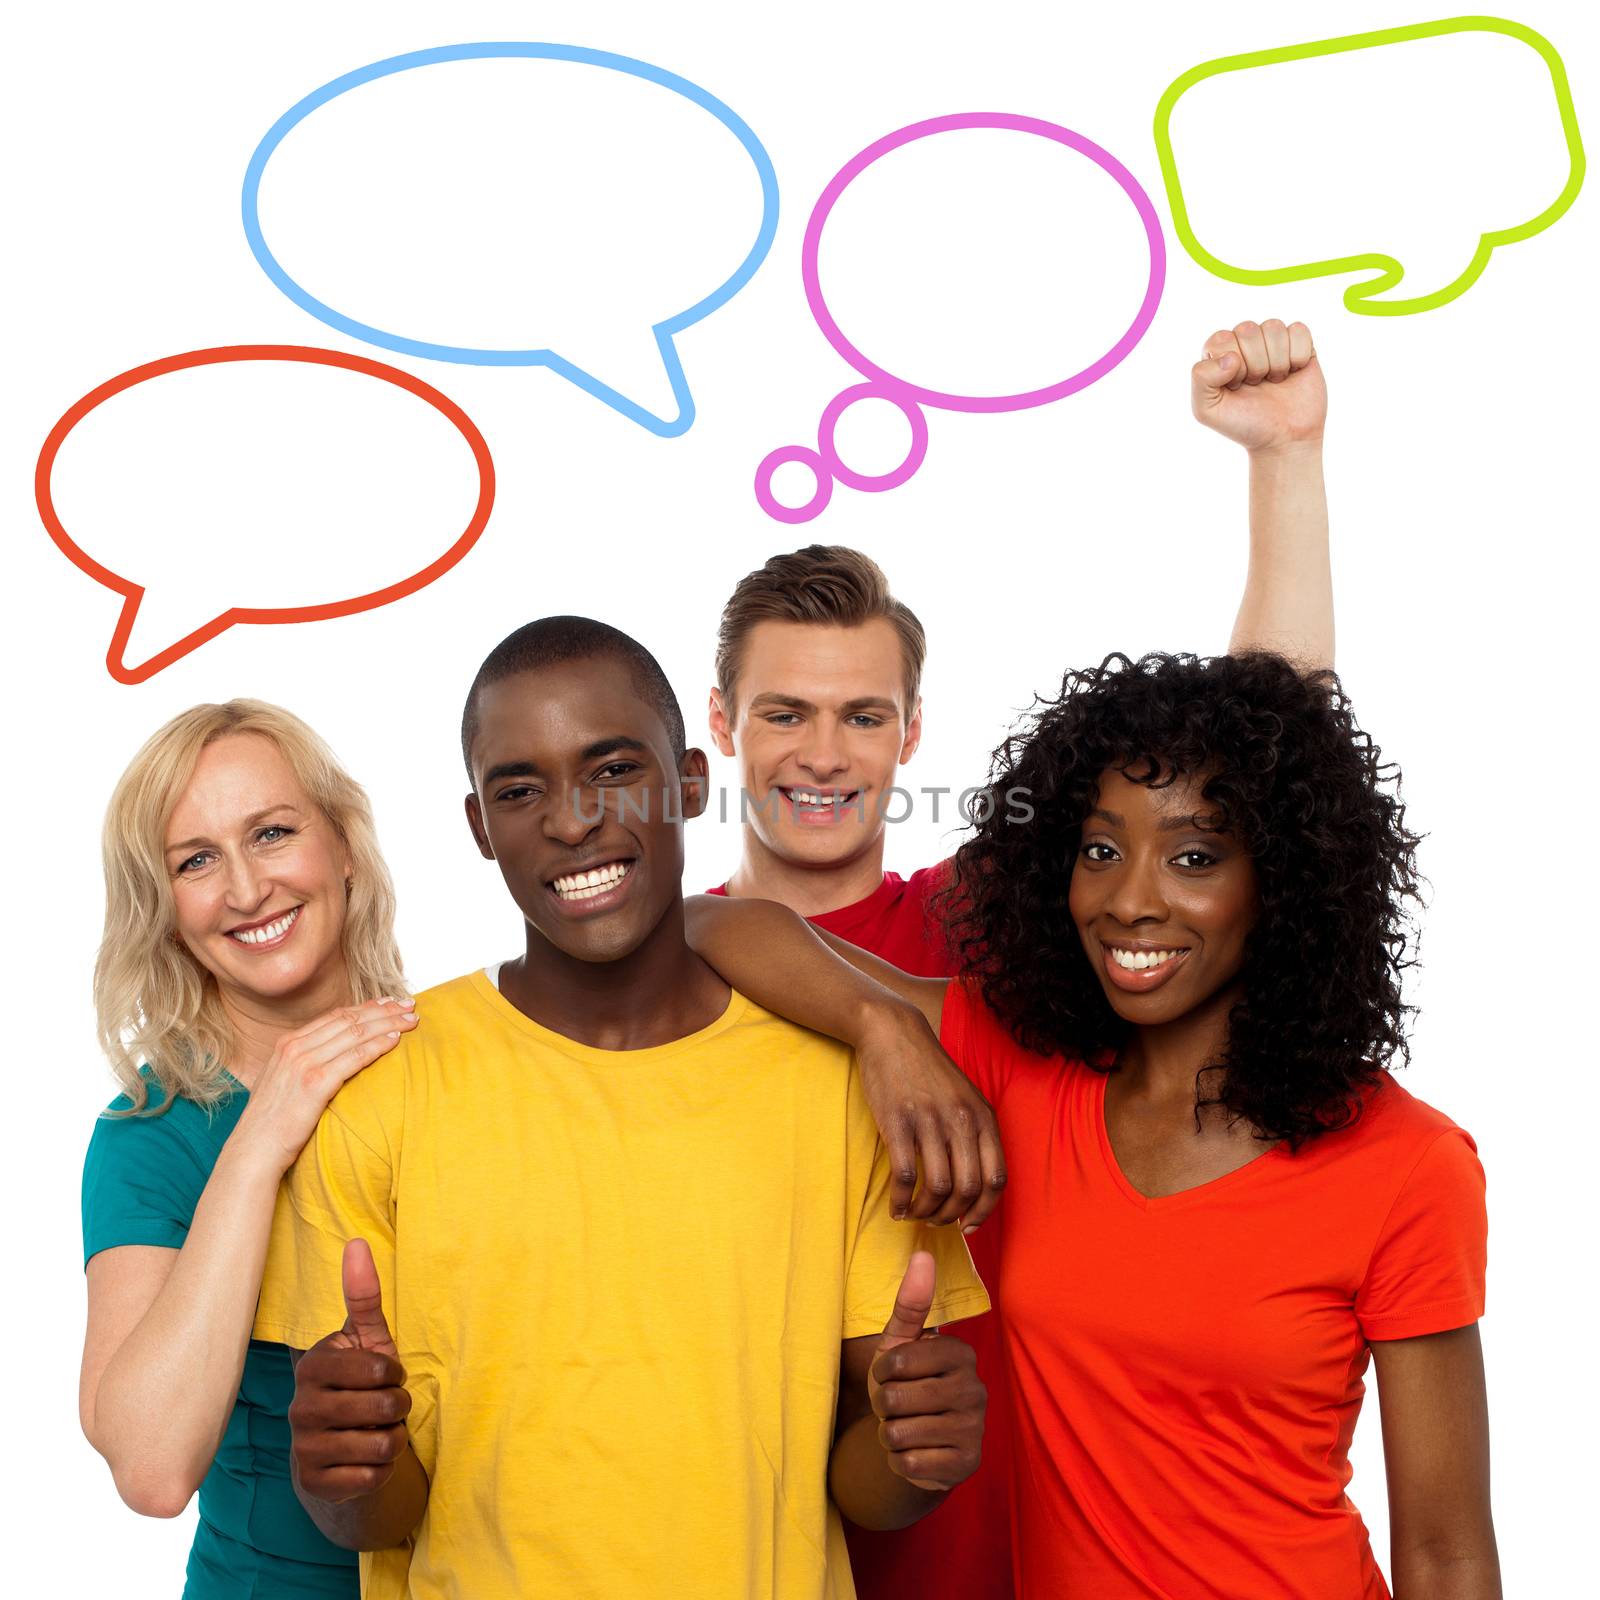 People and speech bubbles design by stockyimages